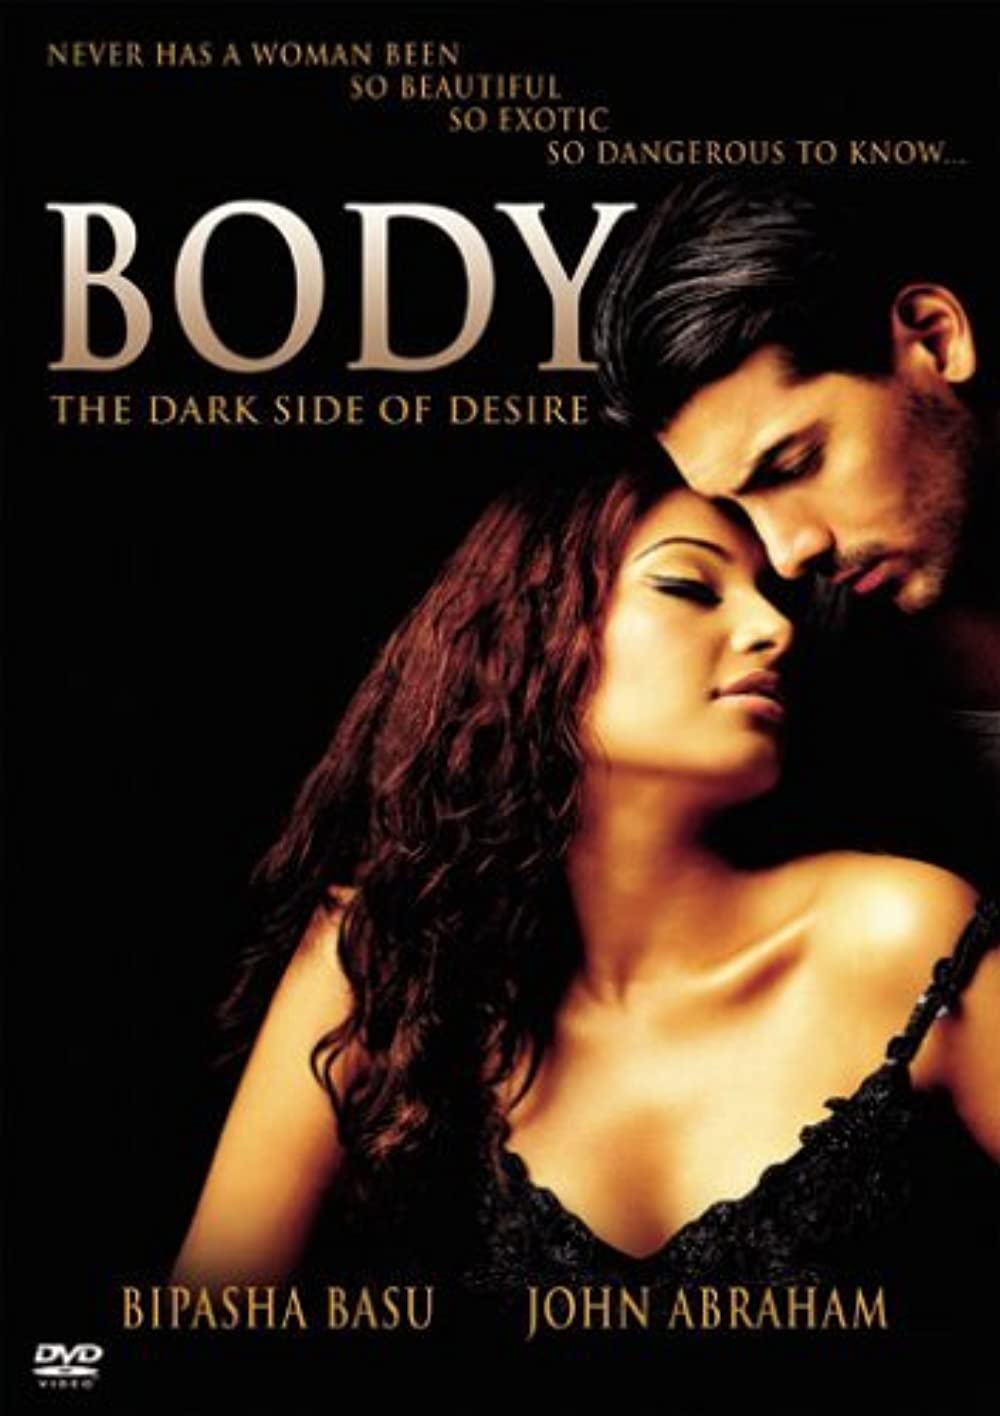 Hot Porn Film Bipasha Ki Hindi Me Dubbed Movie - 10 Adult and Hottest Hindi Movies of All Time You Can Watch